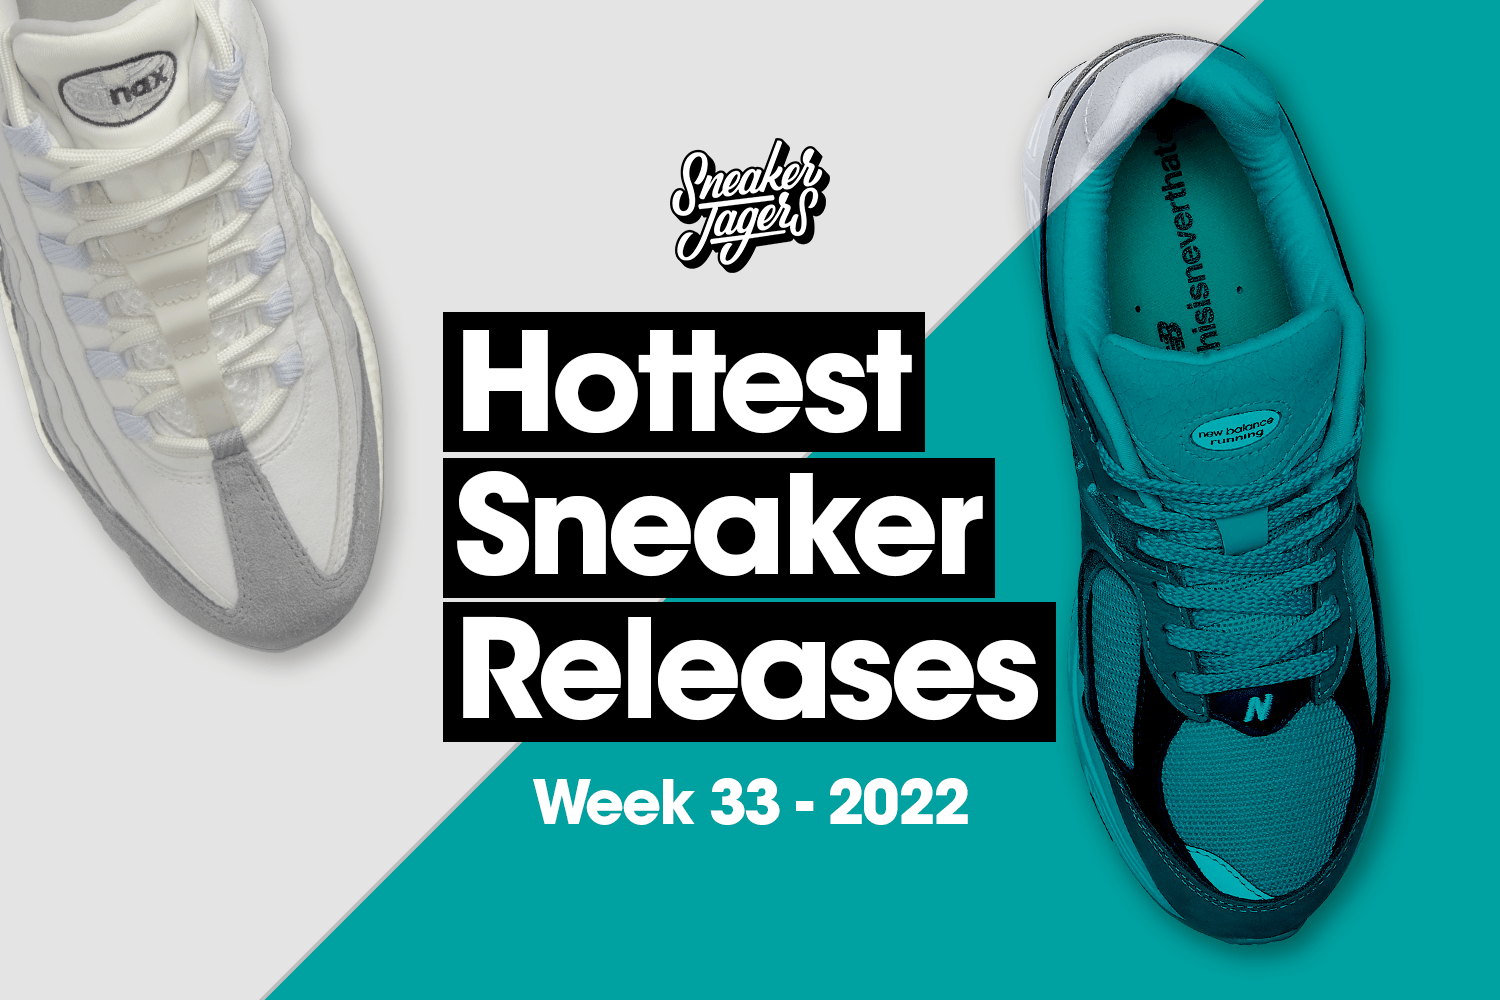 Hottest Sneaker Releases - WK 33